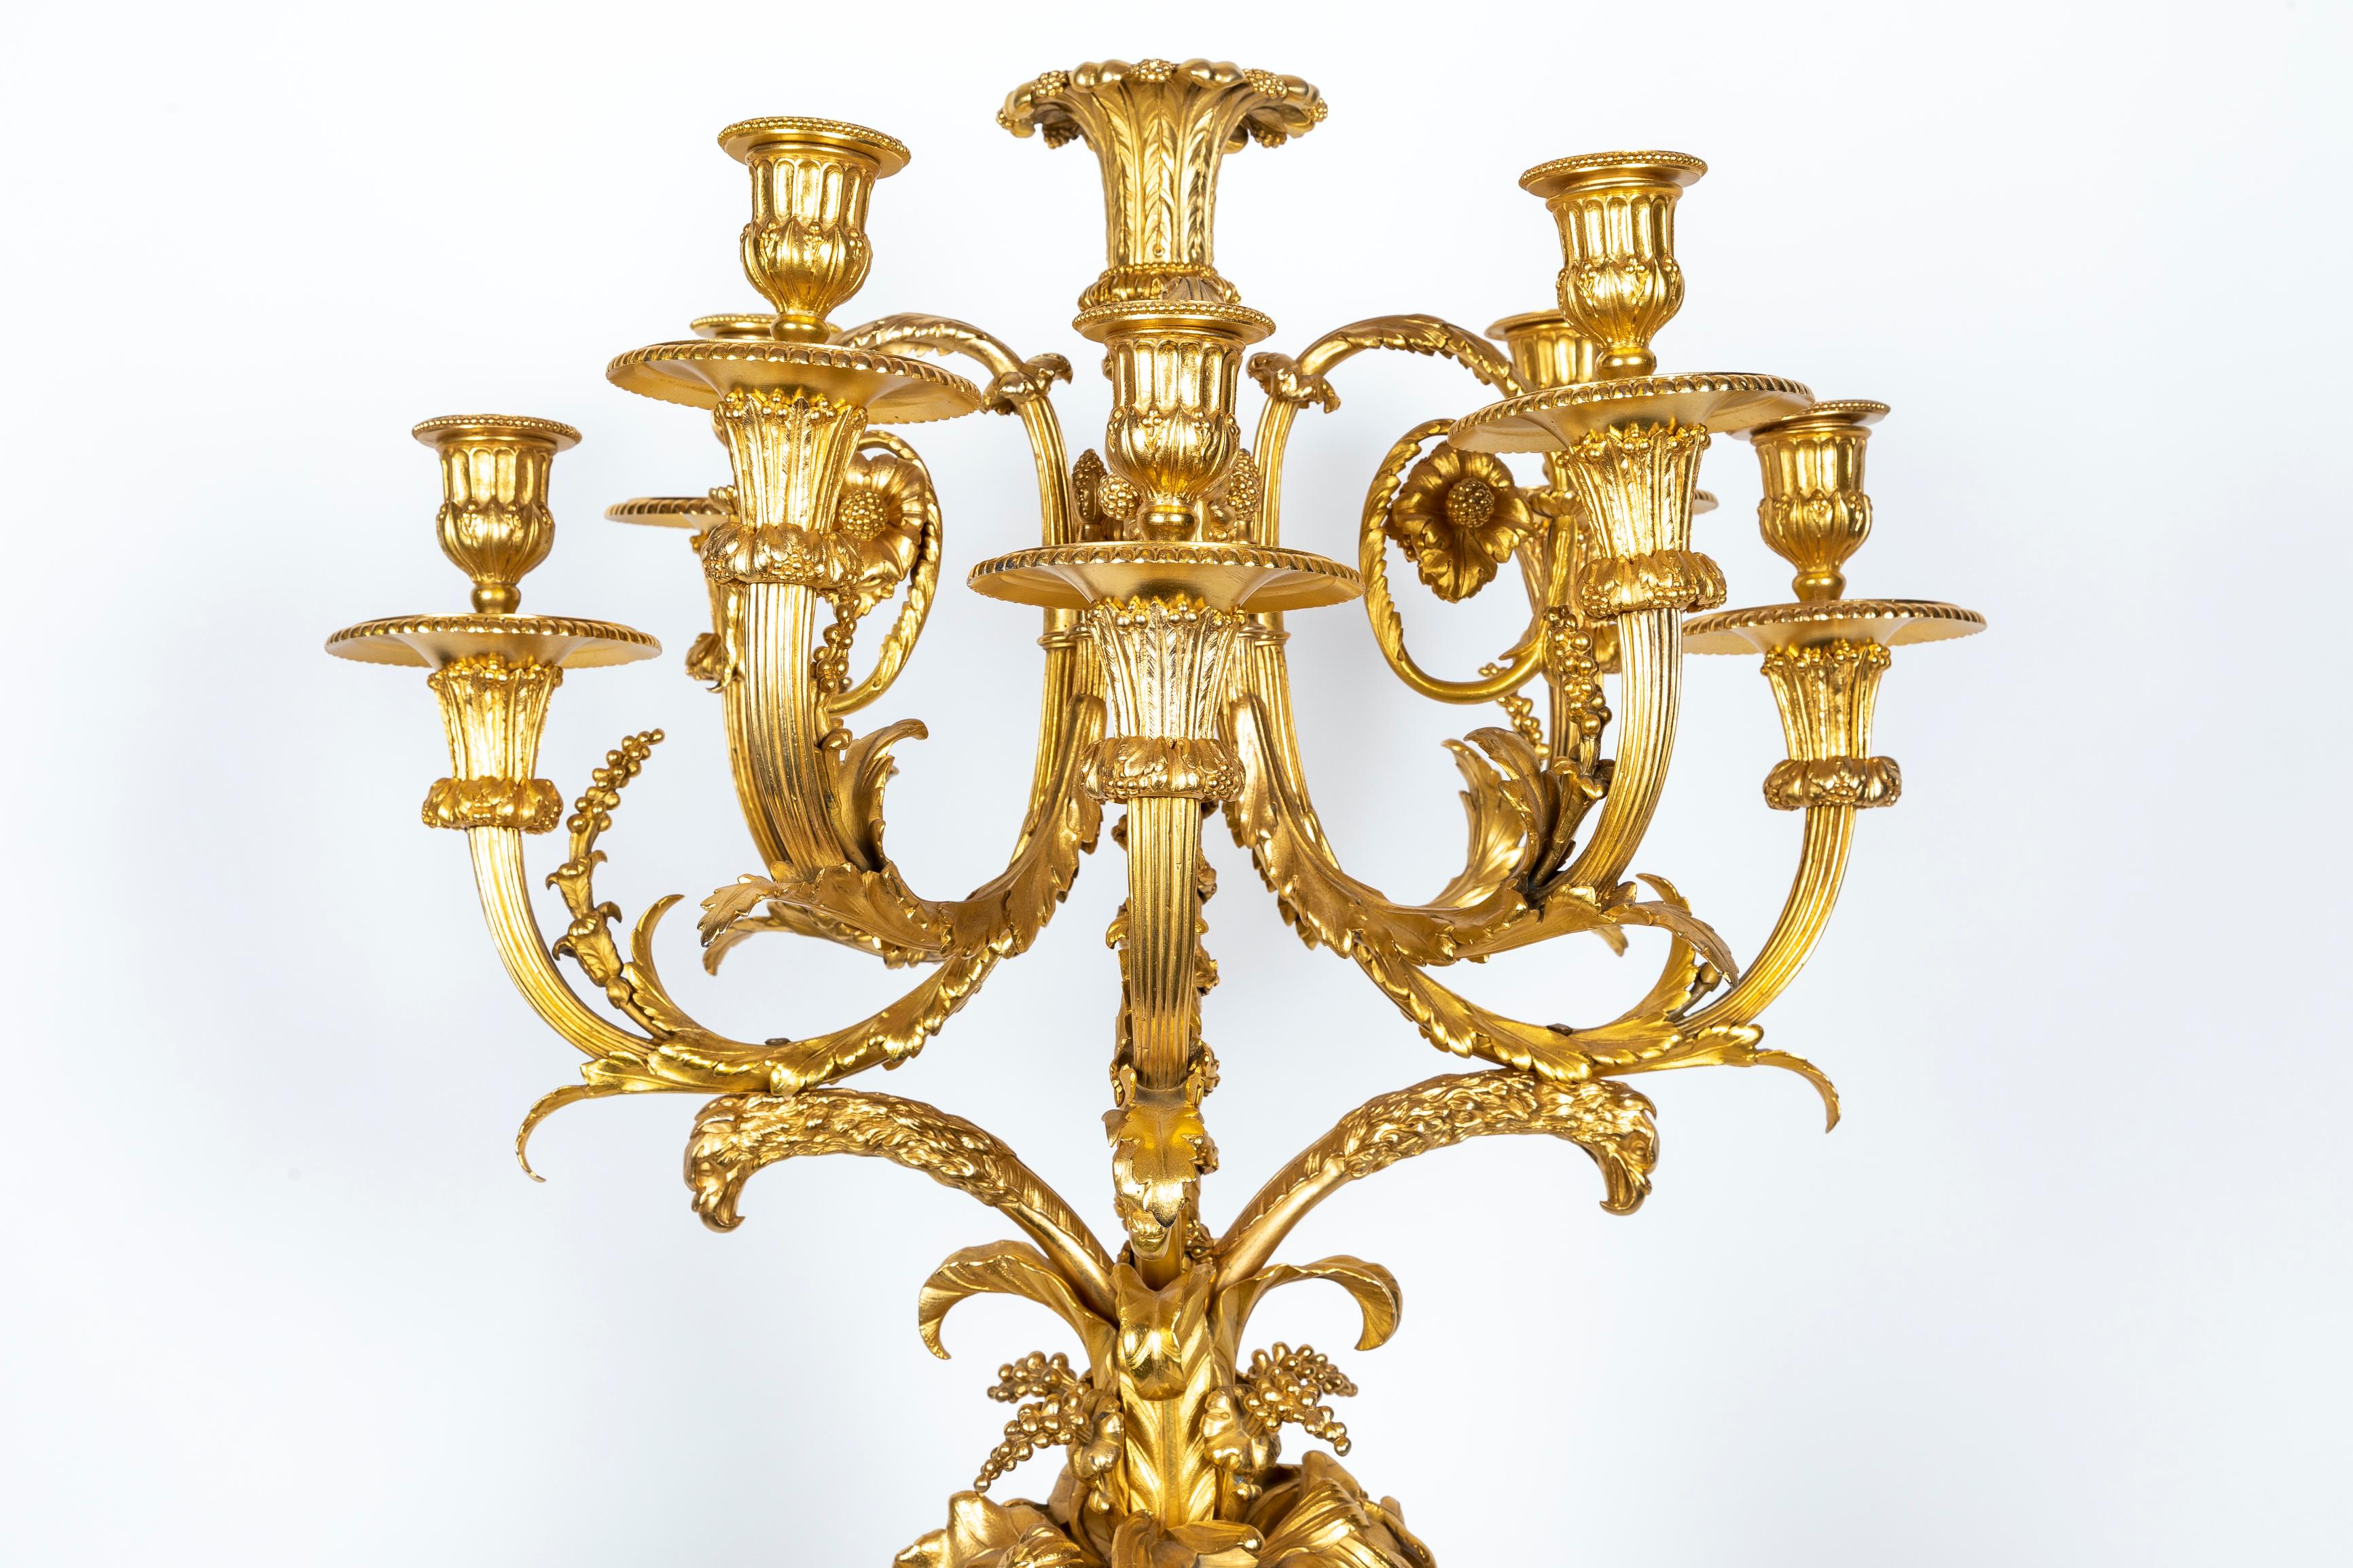 A Pair of Large Antique French Louis XVI Gilt Bronze and Marble Candelabras For Sale 13